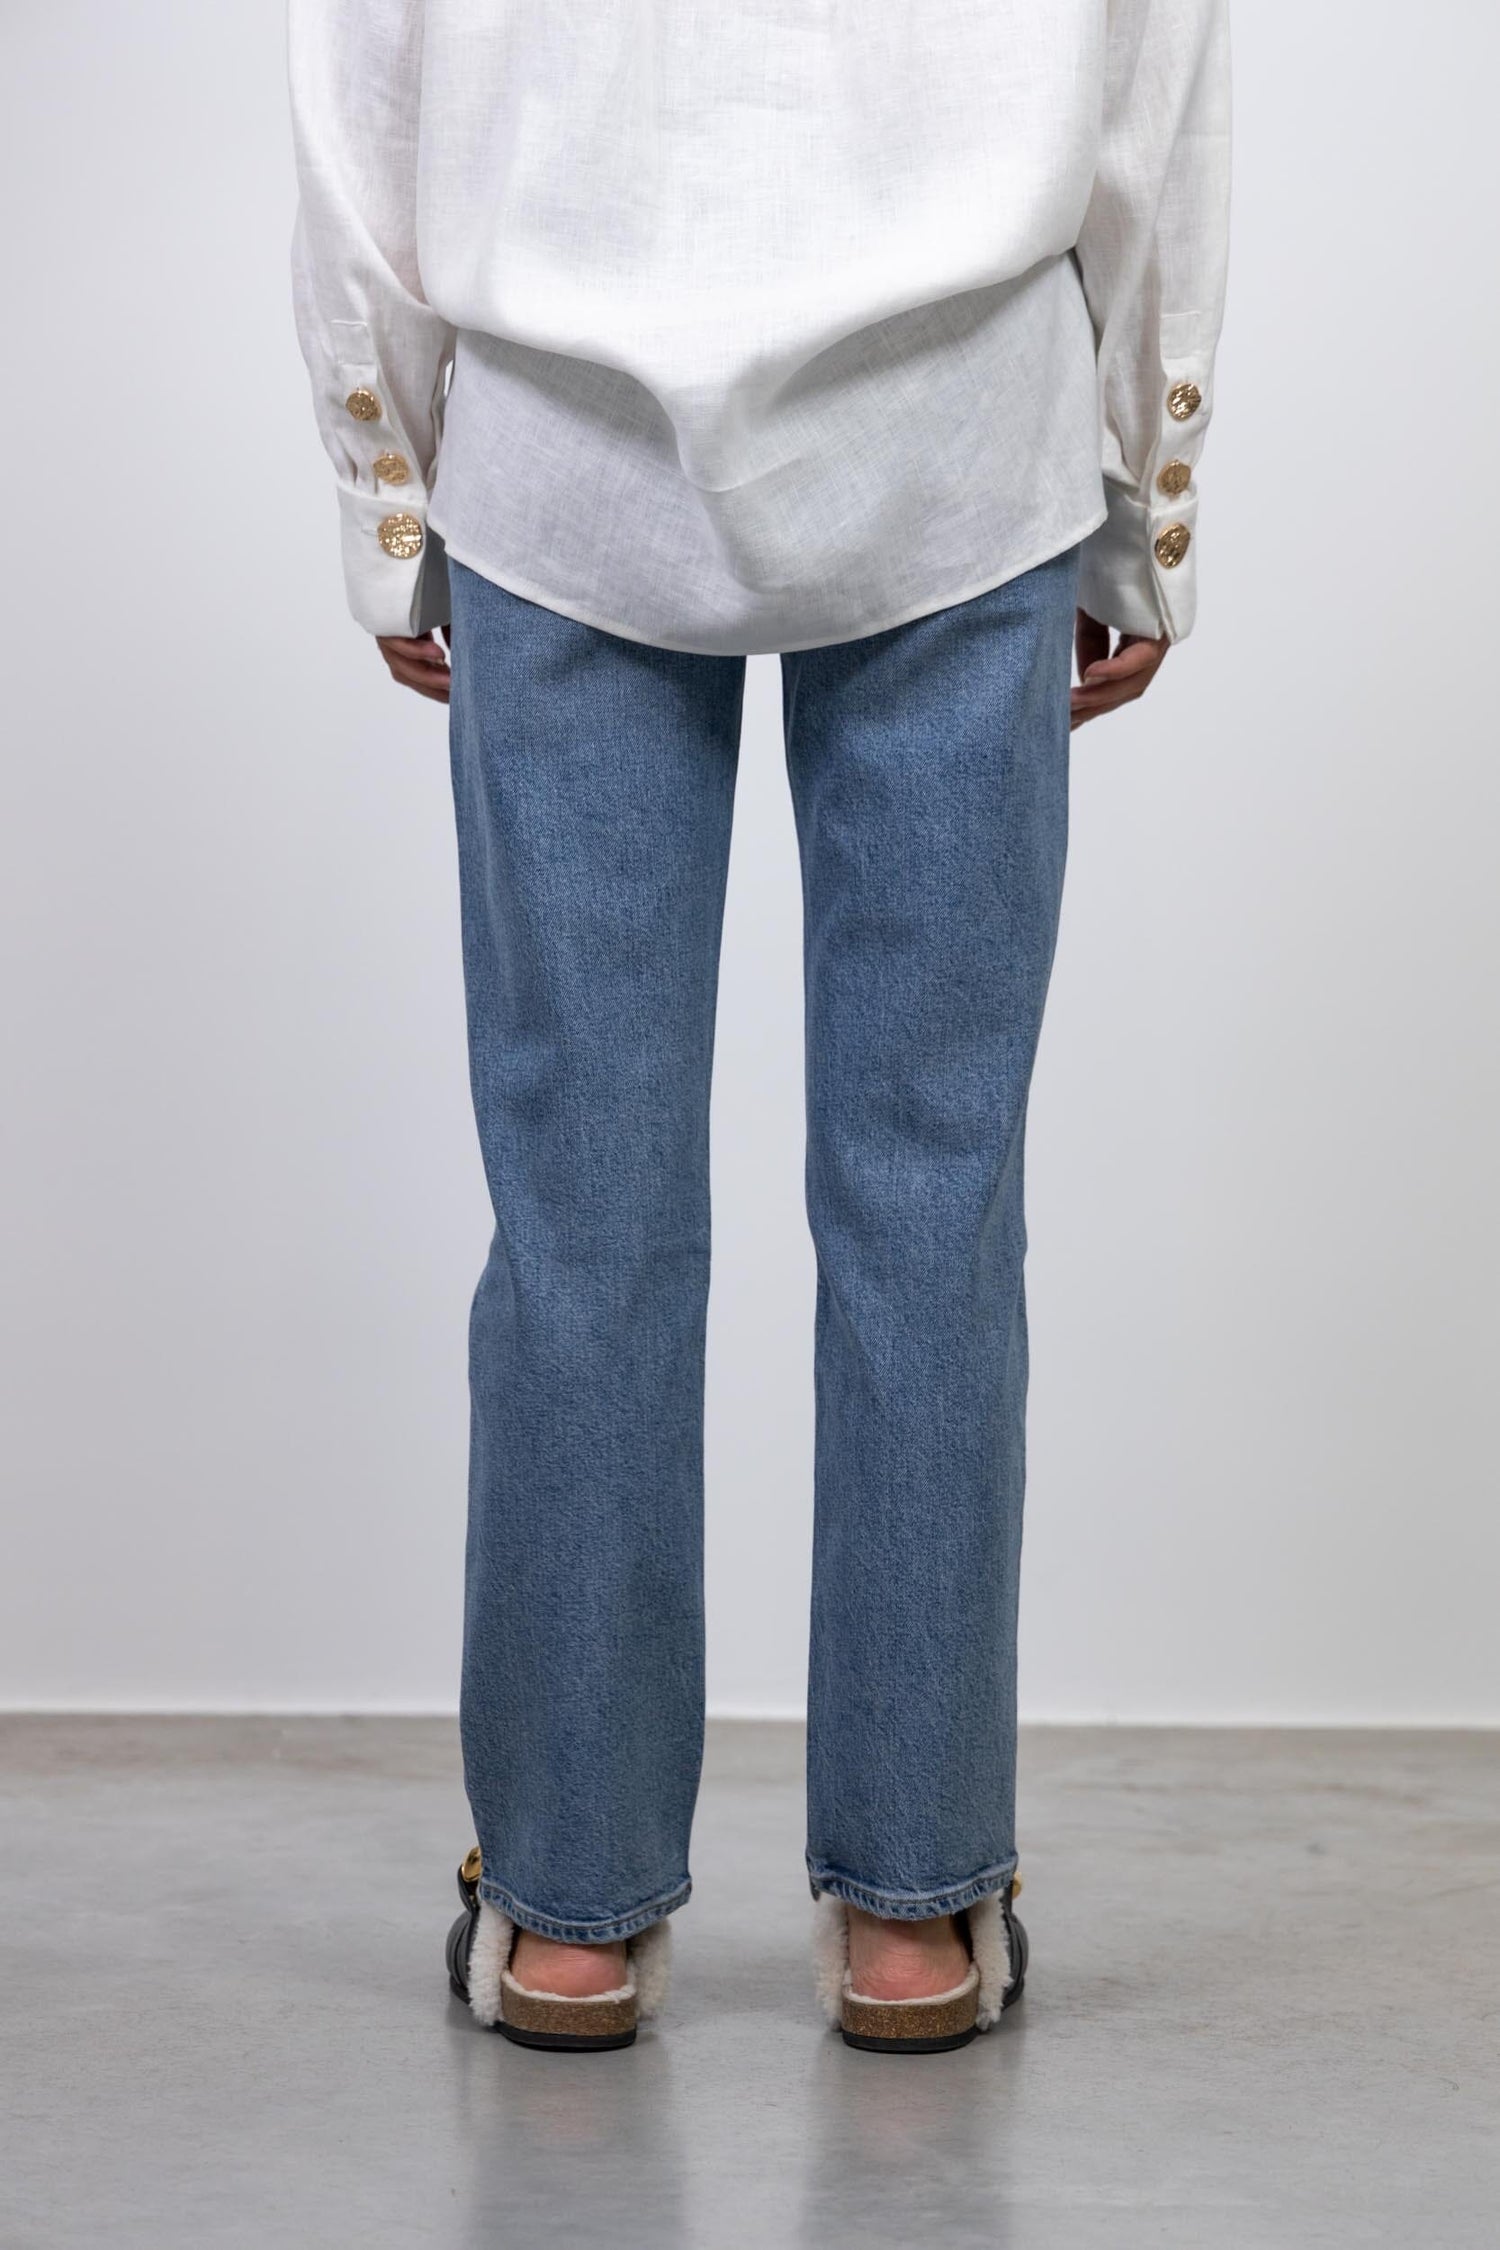 HIGH RISE STOVEPIPE JEANS JEANS AGOLDE 